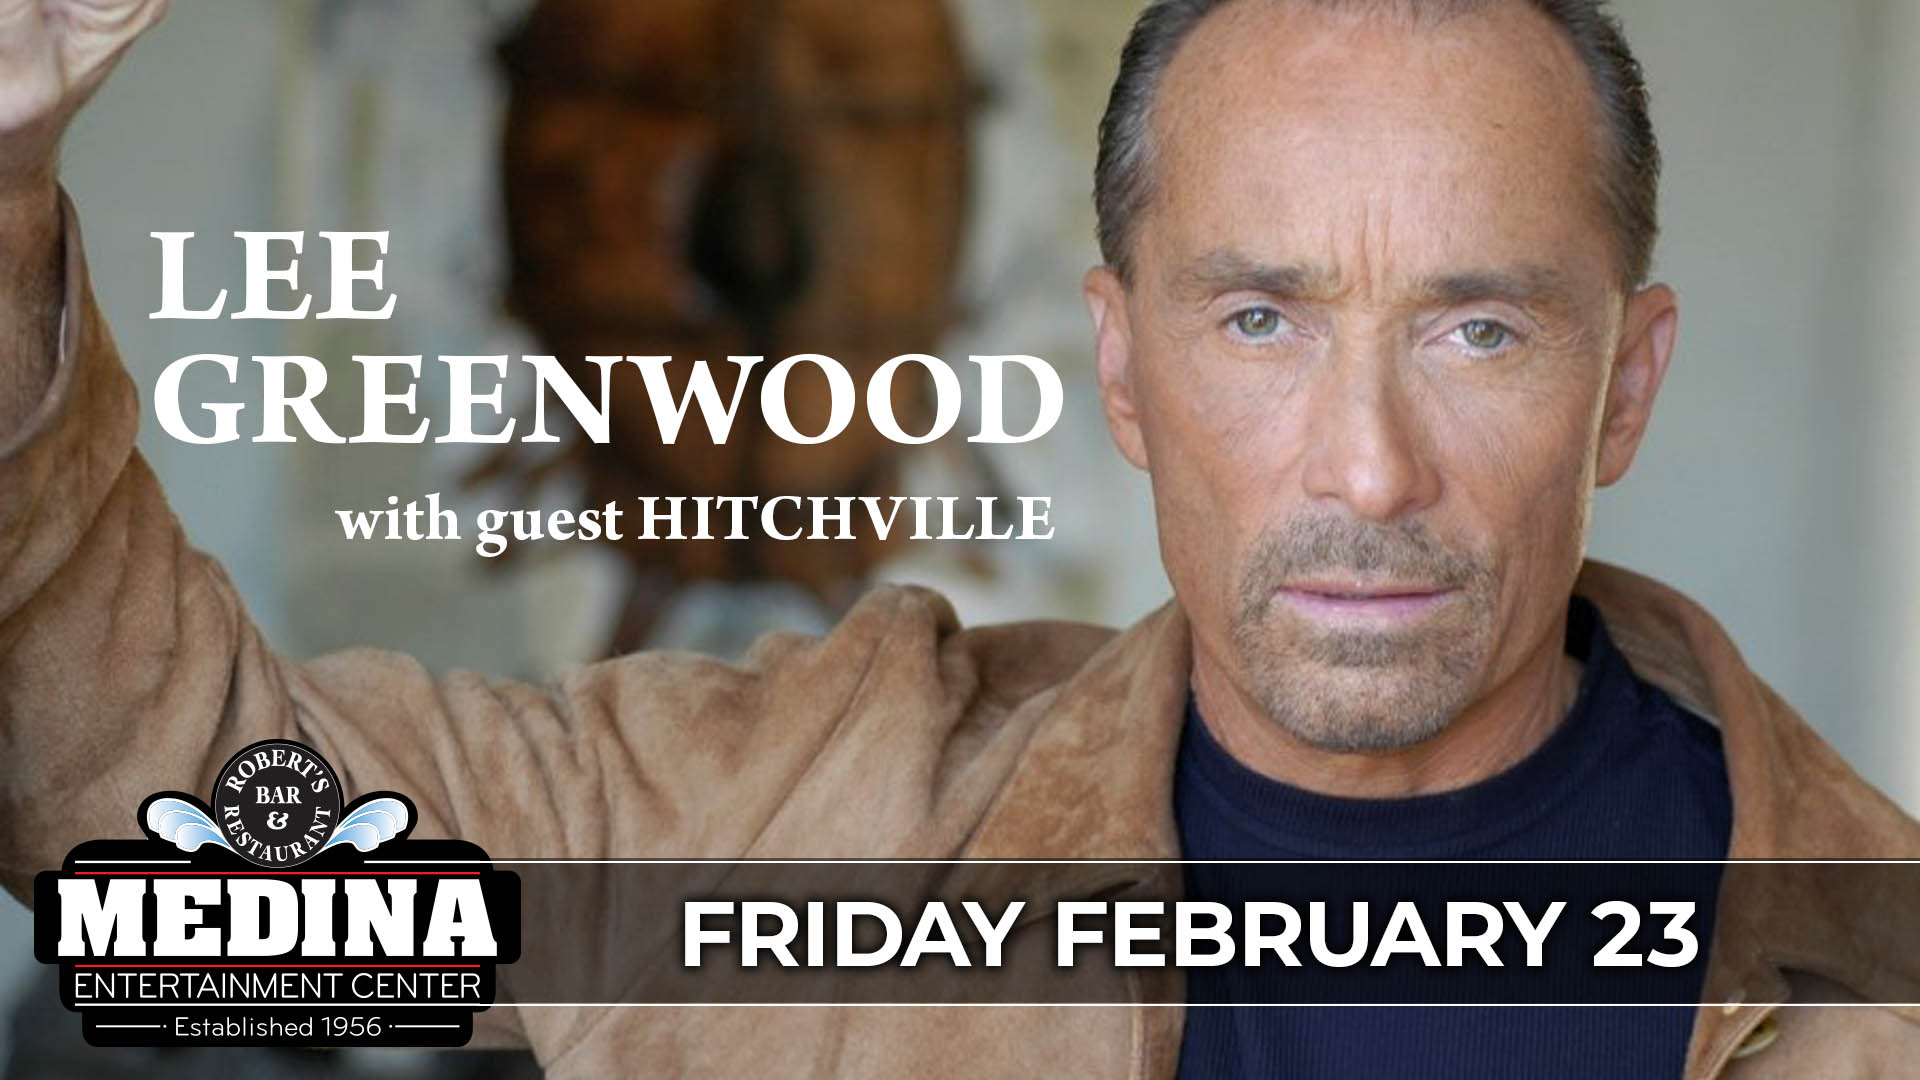 Lee Greenwood with guest Hitchville Medina Entertainment Center Friday, February 23rd, 2024 Doors: 7:00PM | Music: 7:45PM | 21+ Tickets on-sale Friday, December 15th at 12PM General Seating $37 / Silver Reserved $47 / Gold Reserved $54 plus applicable fees